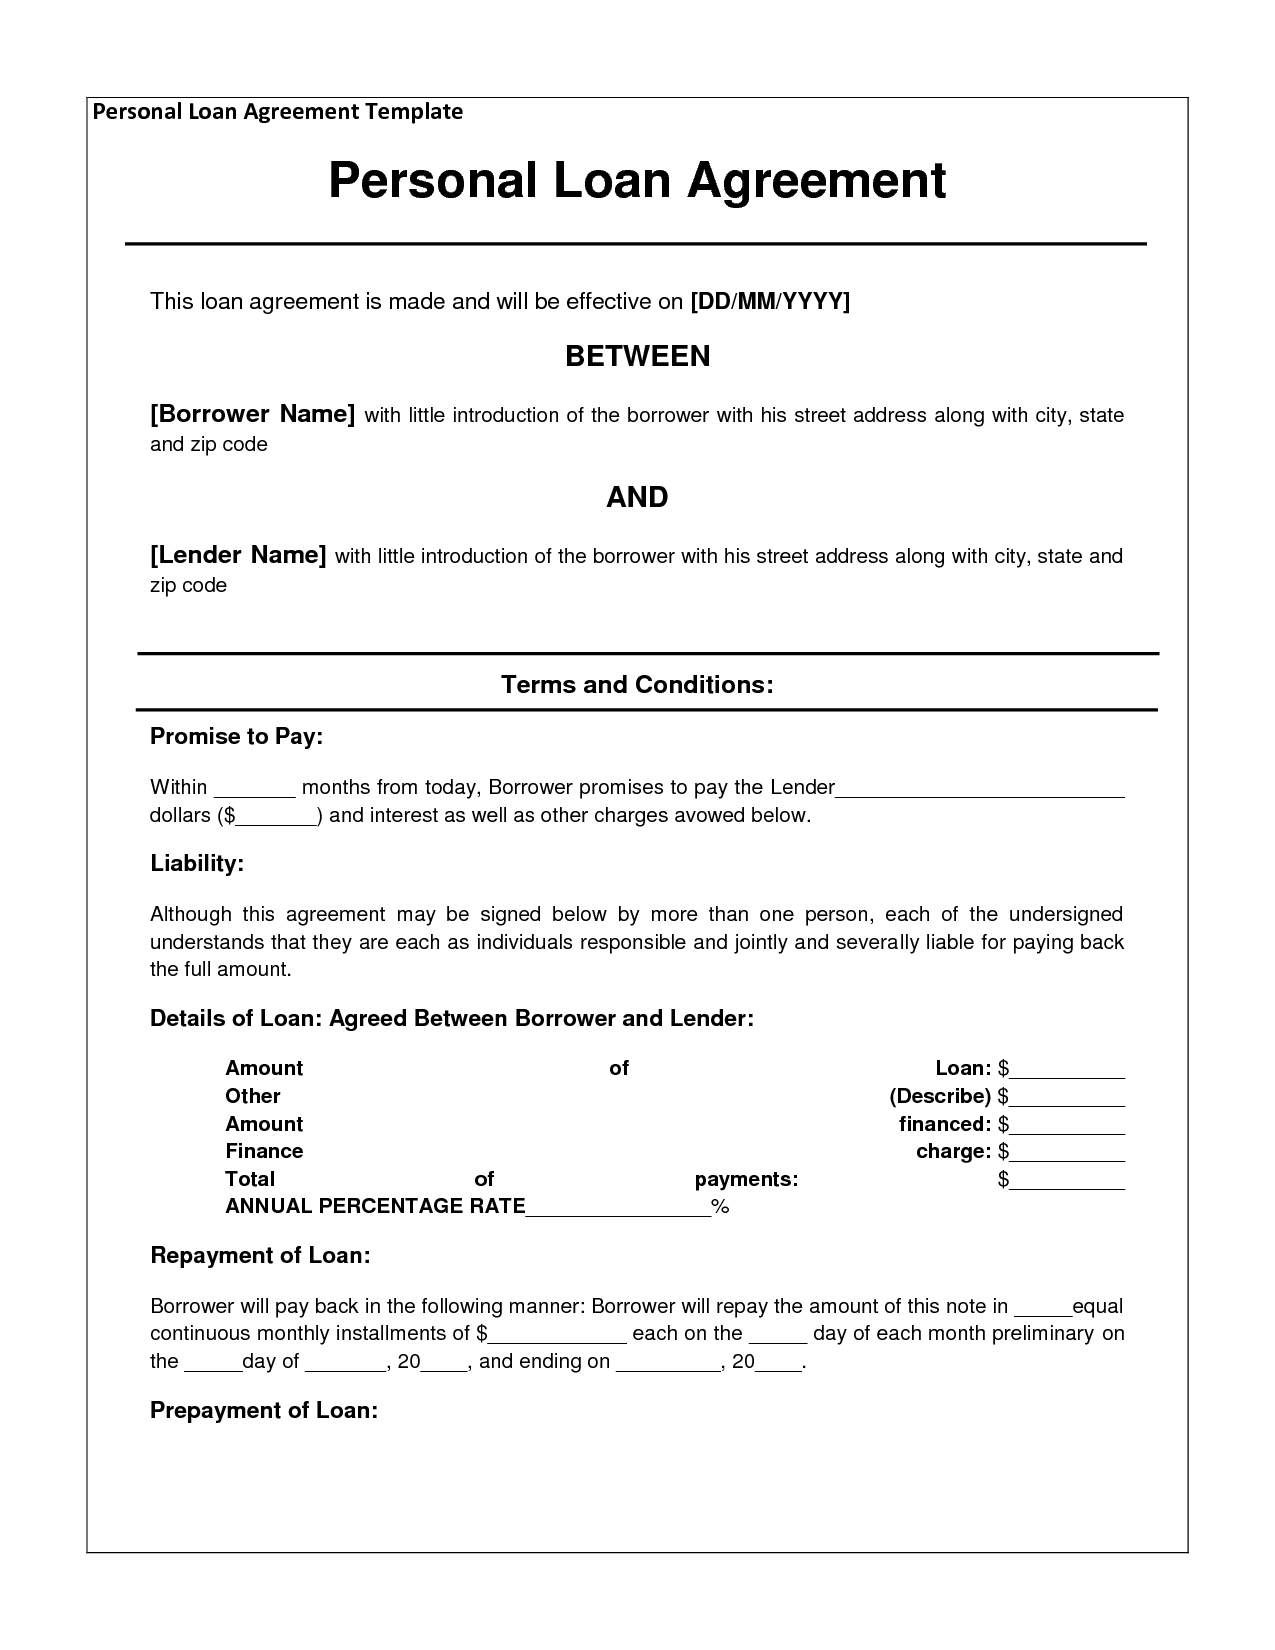 Free Personal Loan Agreement Form Template - $1000 Approved In 2 - Free Printable Personal Loan Forms